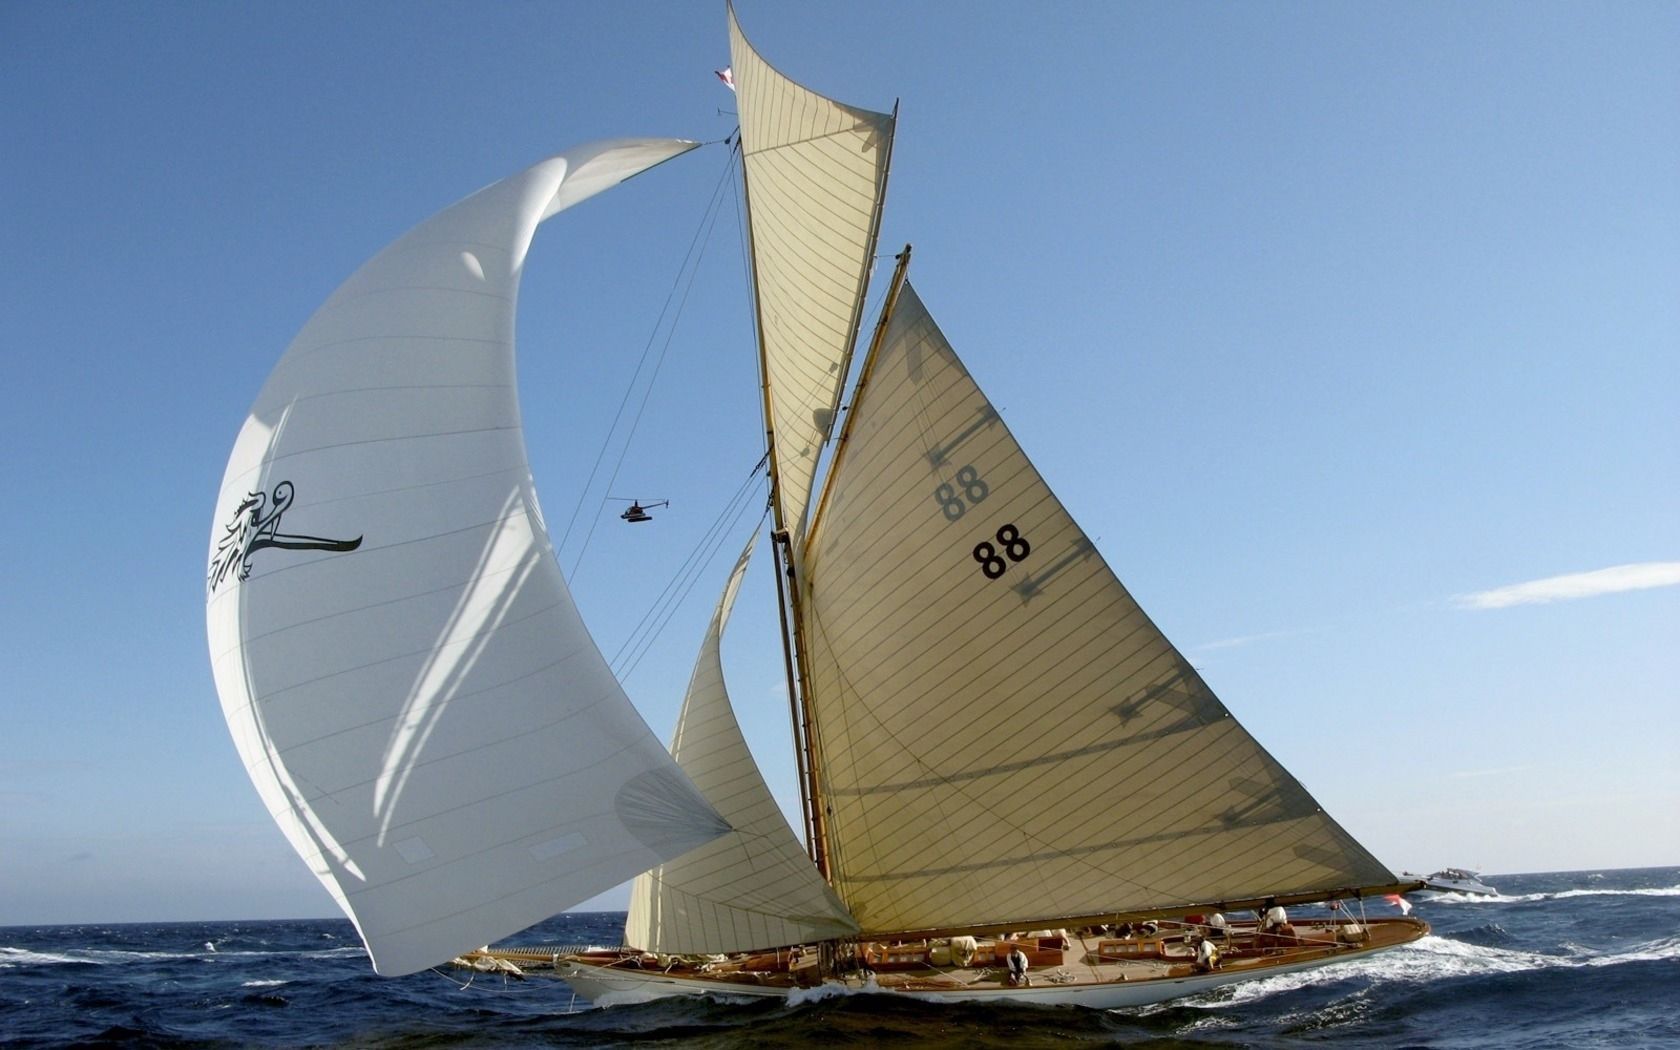 Race Sailing wallpapers and images - wallpapers, pictures, photos